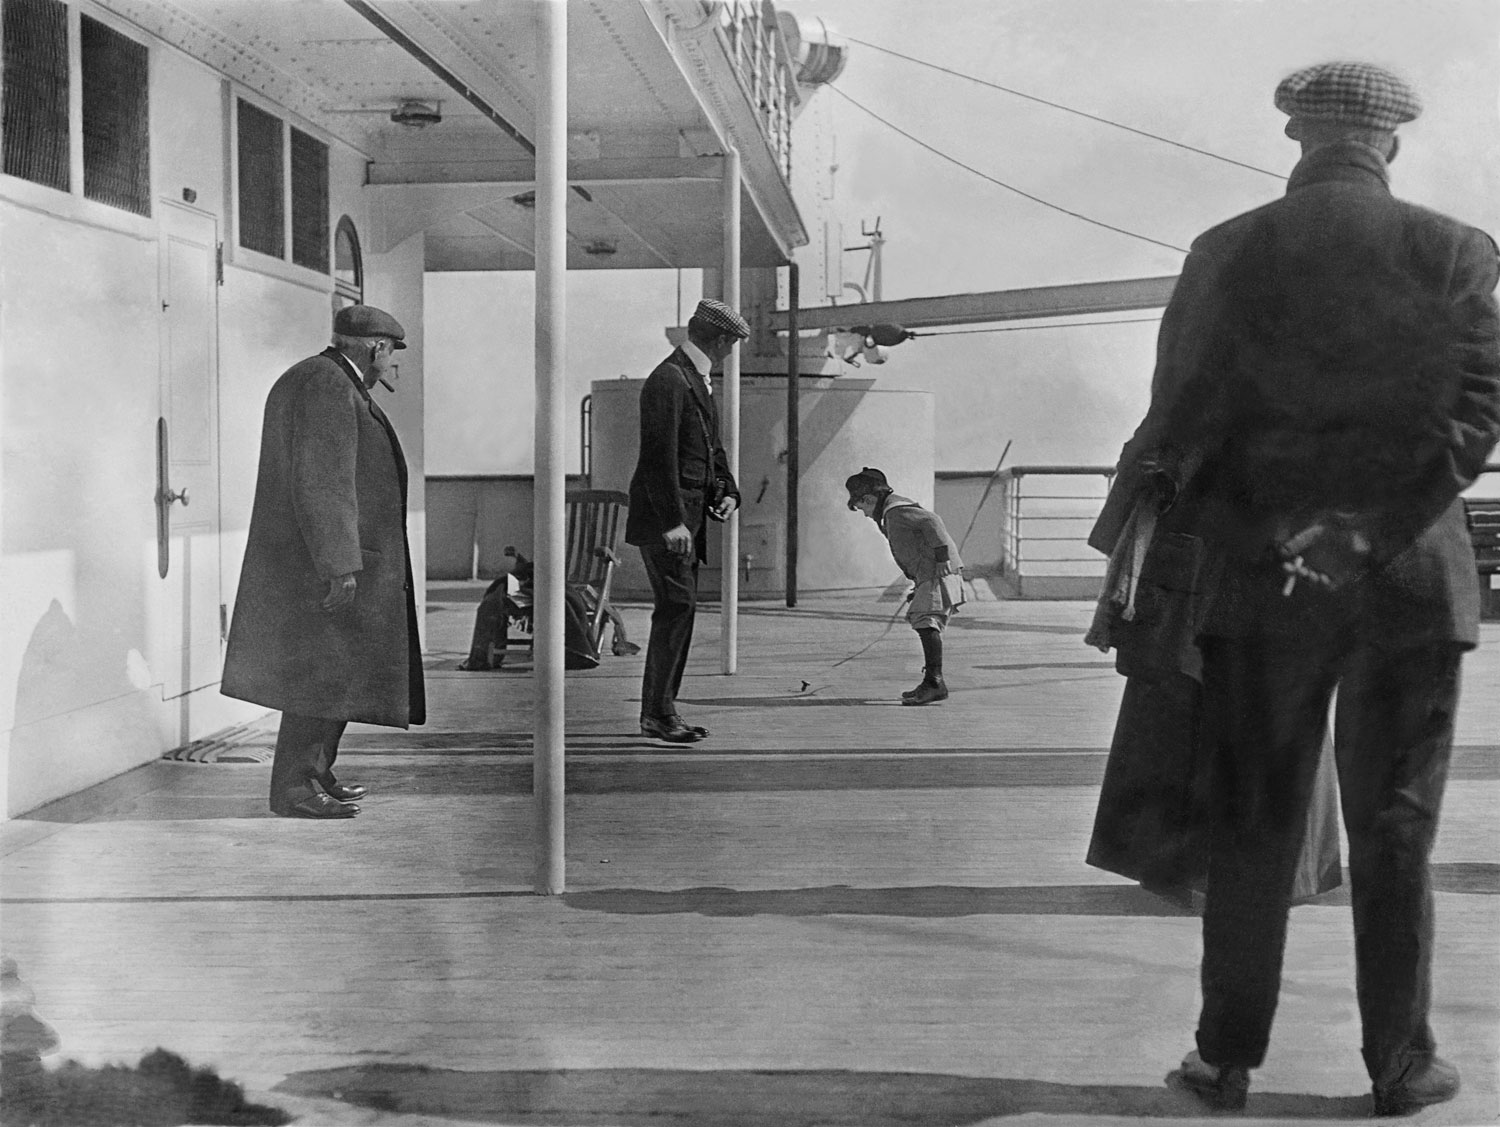 Doug Spedden playing on the deck of the Titanic, April, 12 1912.